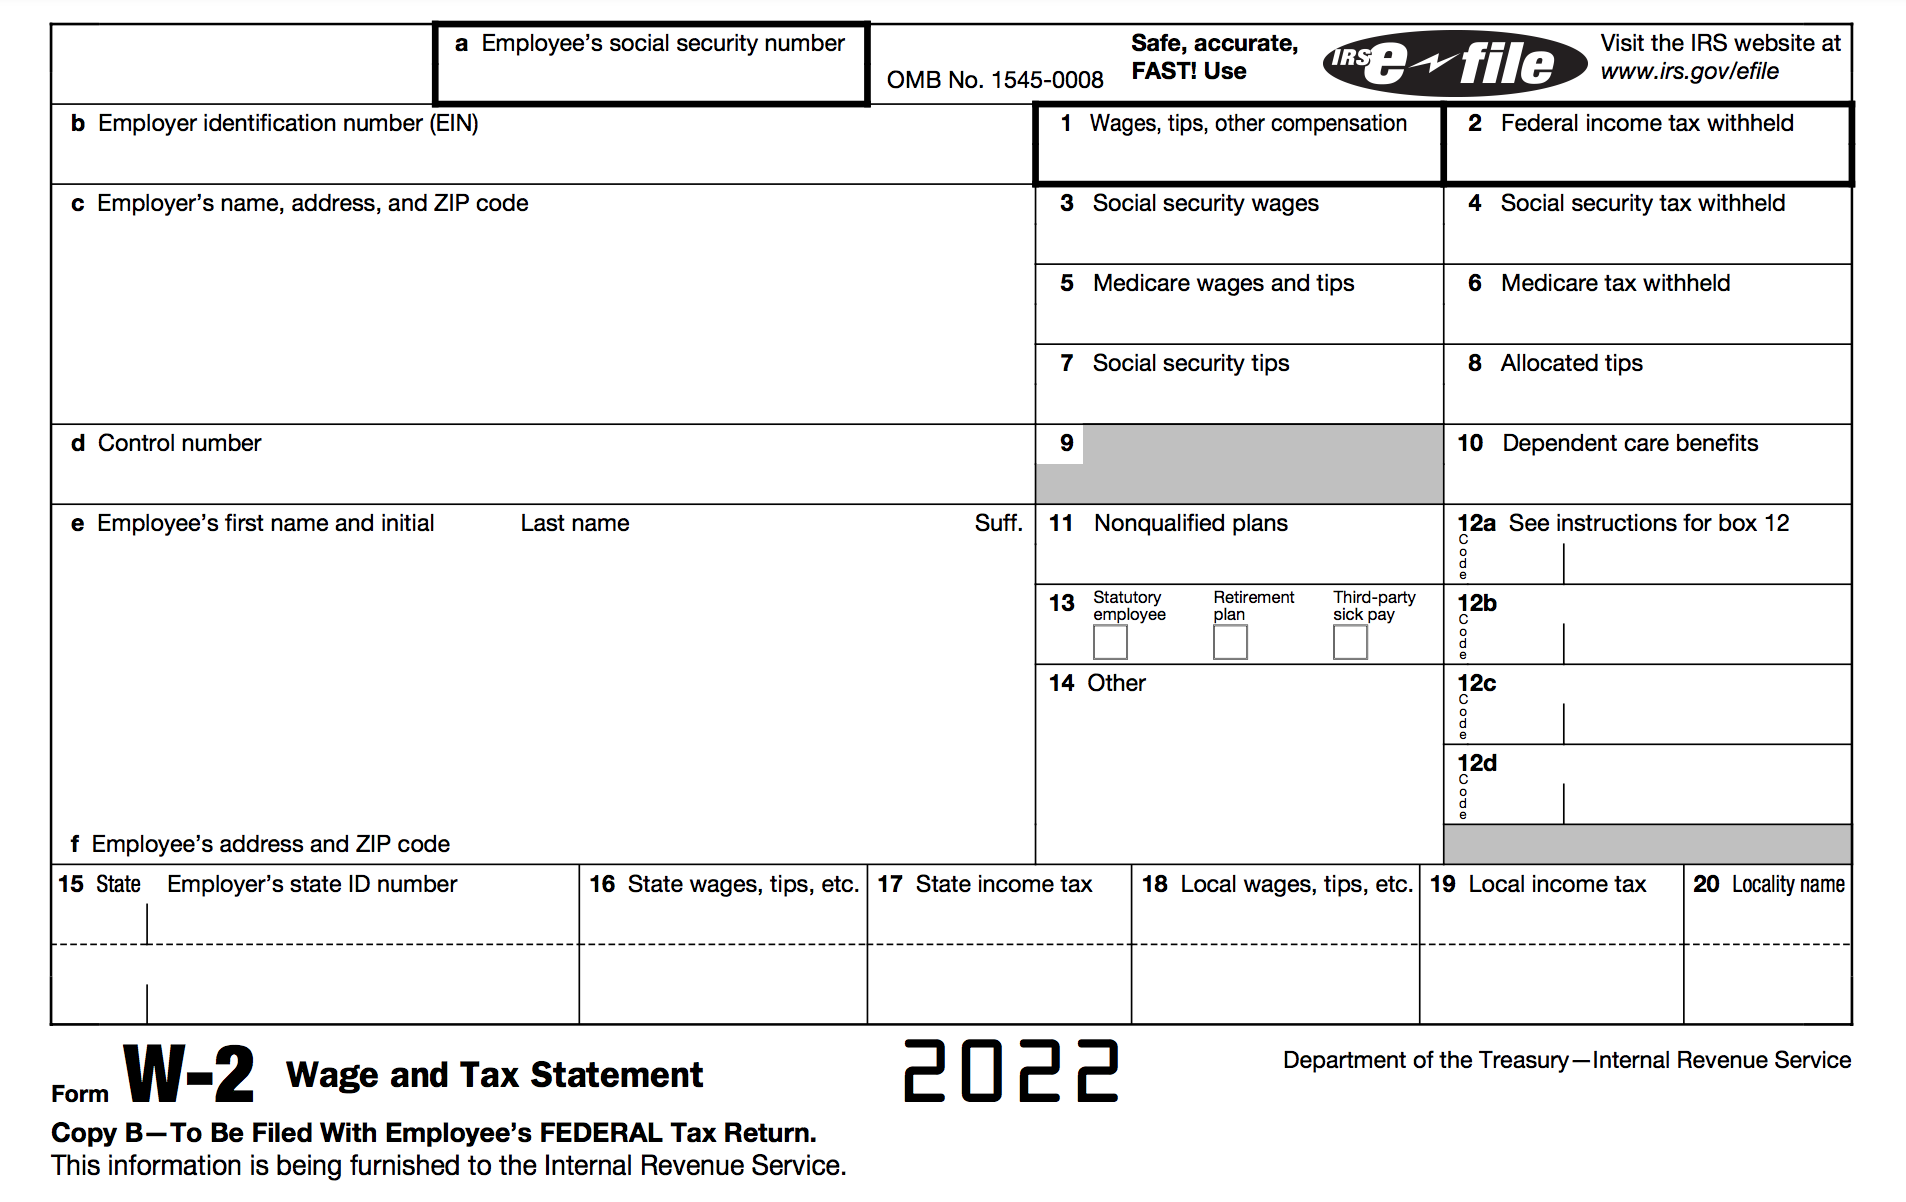 How To Fill Out A W-2 Tax Form | Smartasset within W2 Form Instructions 2022